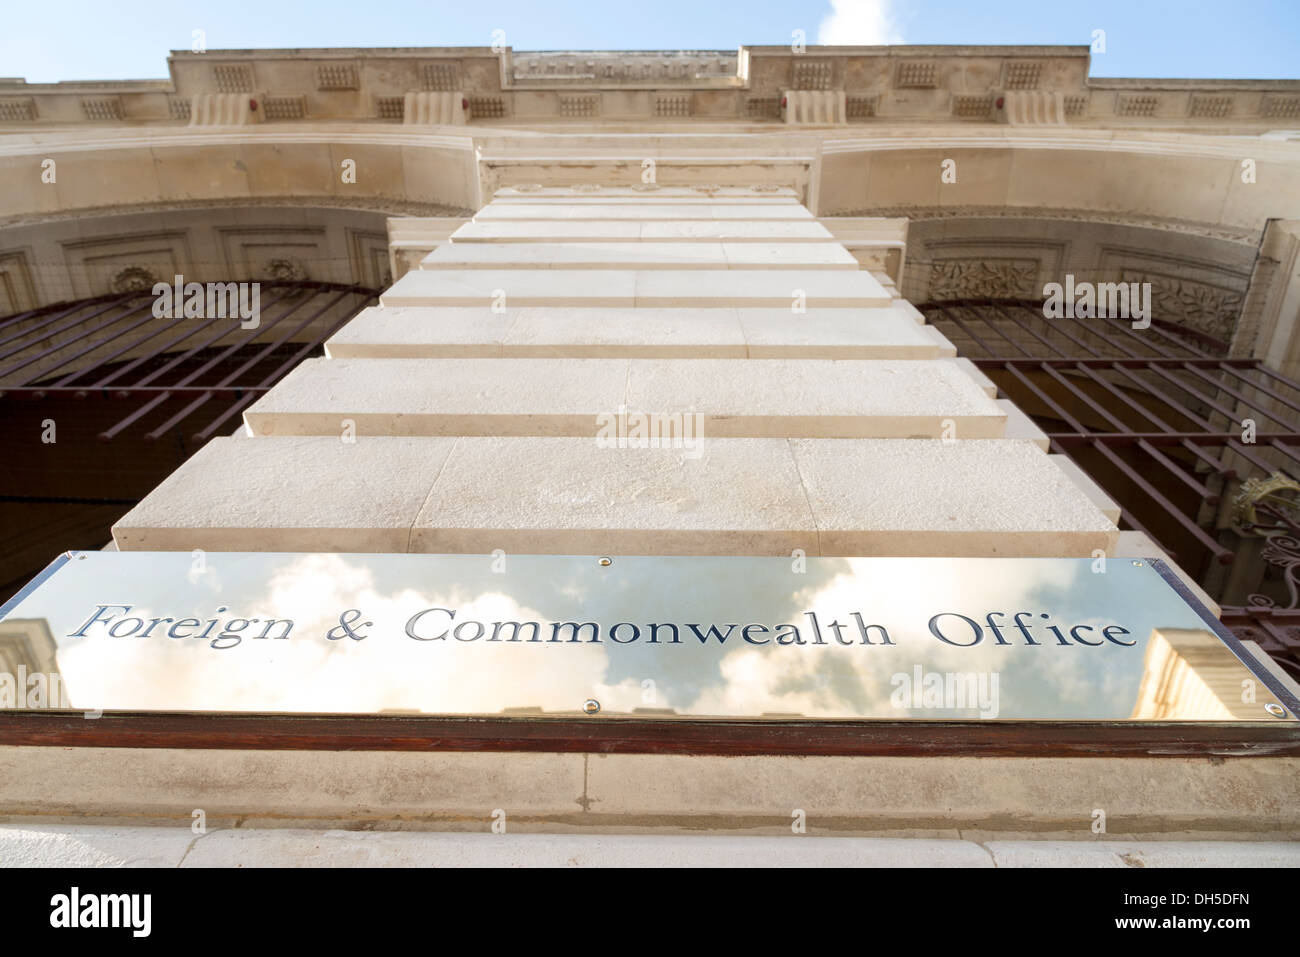 Foreign & Commonwealth Office, Whitehall, London, England, UK Stock Photo